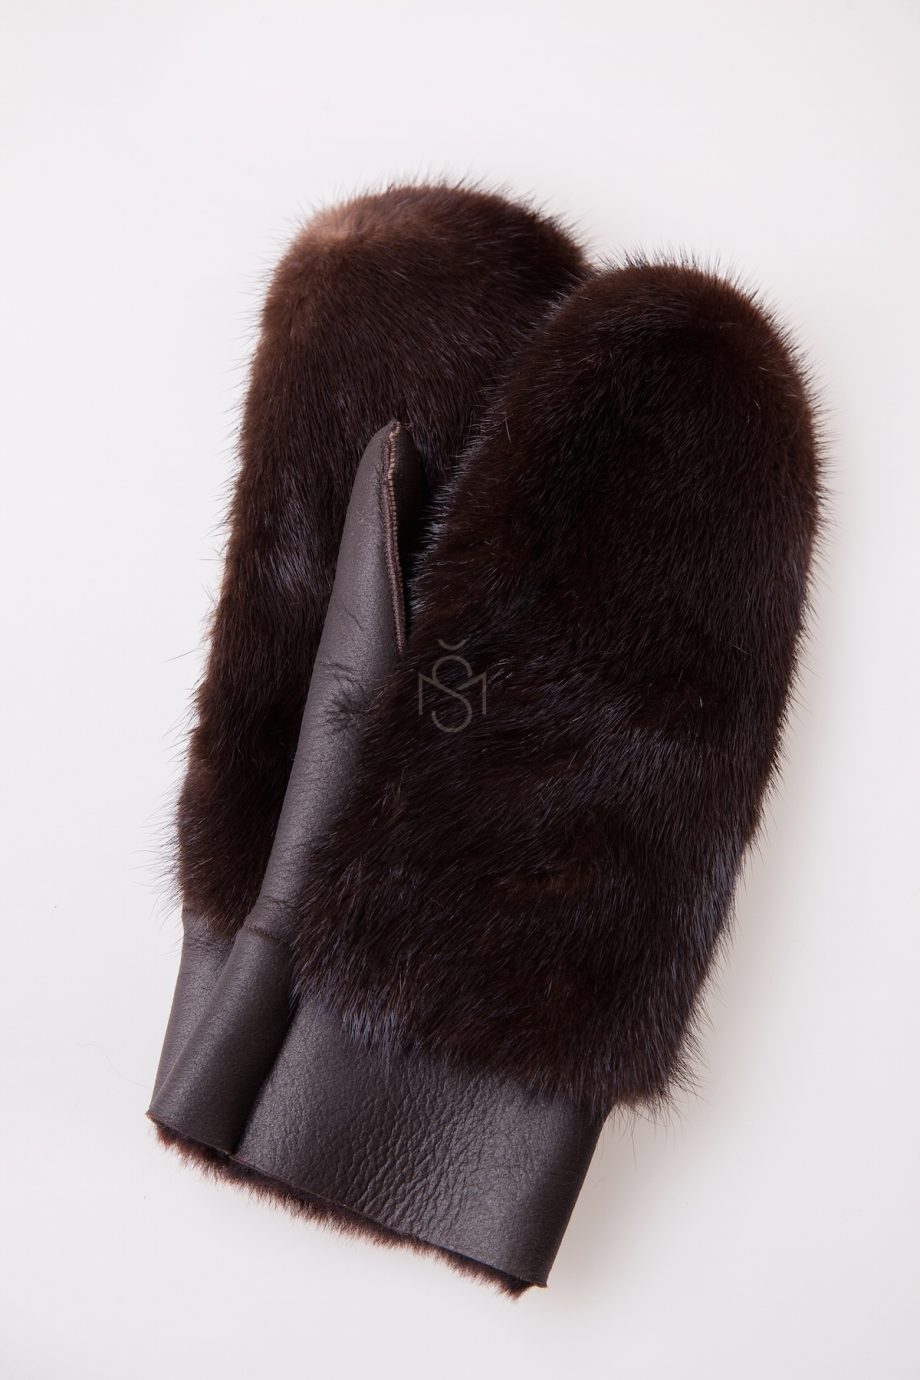 Sheepskin mittens with mink fur, color - natural brown, made by Silta Mada fur studio in Vilnius